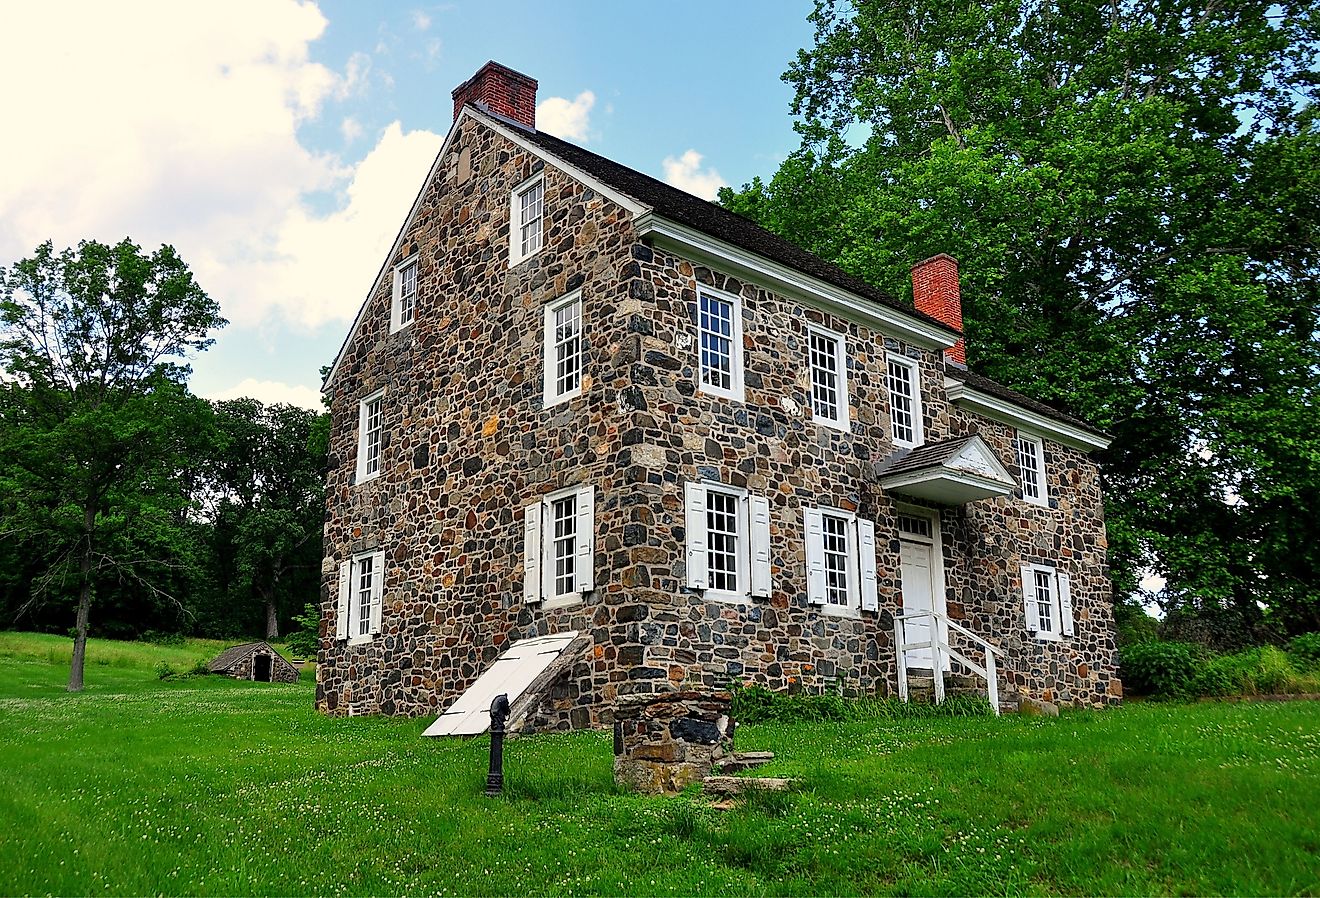 The Benjamin Ring House used as headquarters by General George Washington during the 1777 Revolutionary War Battle of the Brandywine. Image credit LEE SNIDER PHOTO IMAGES via Shutterstock.